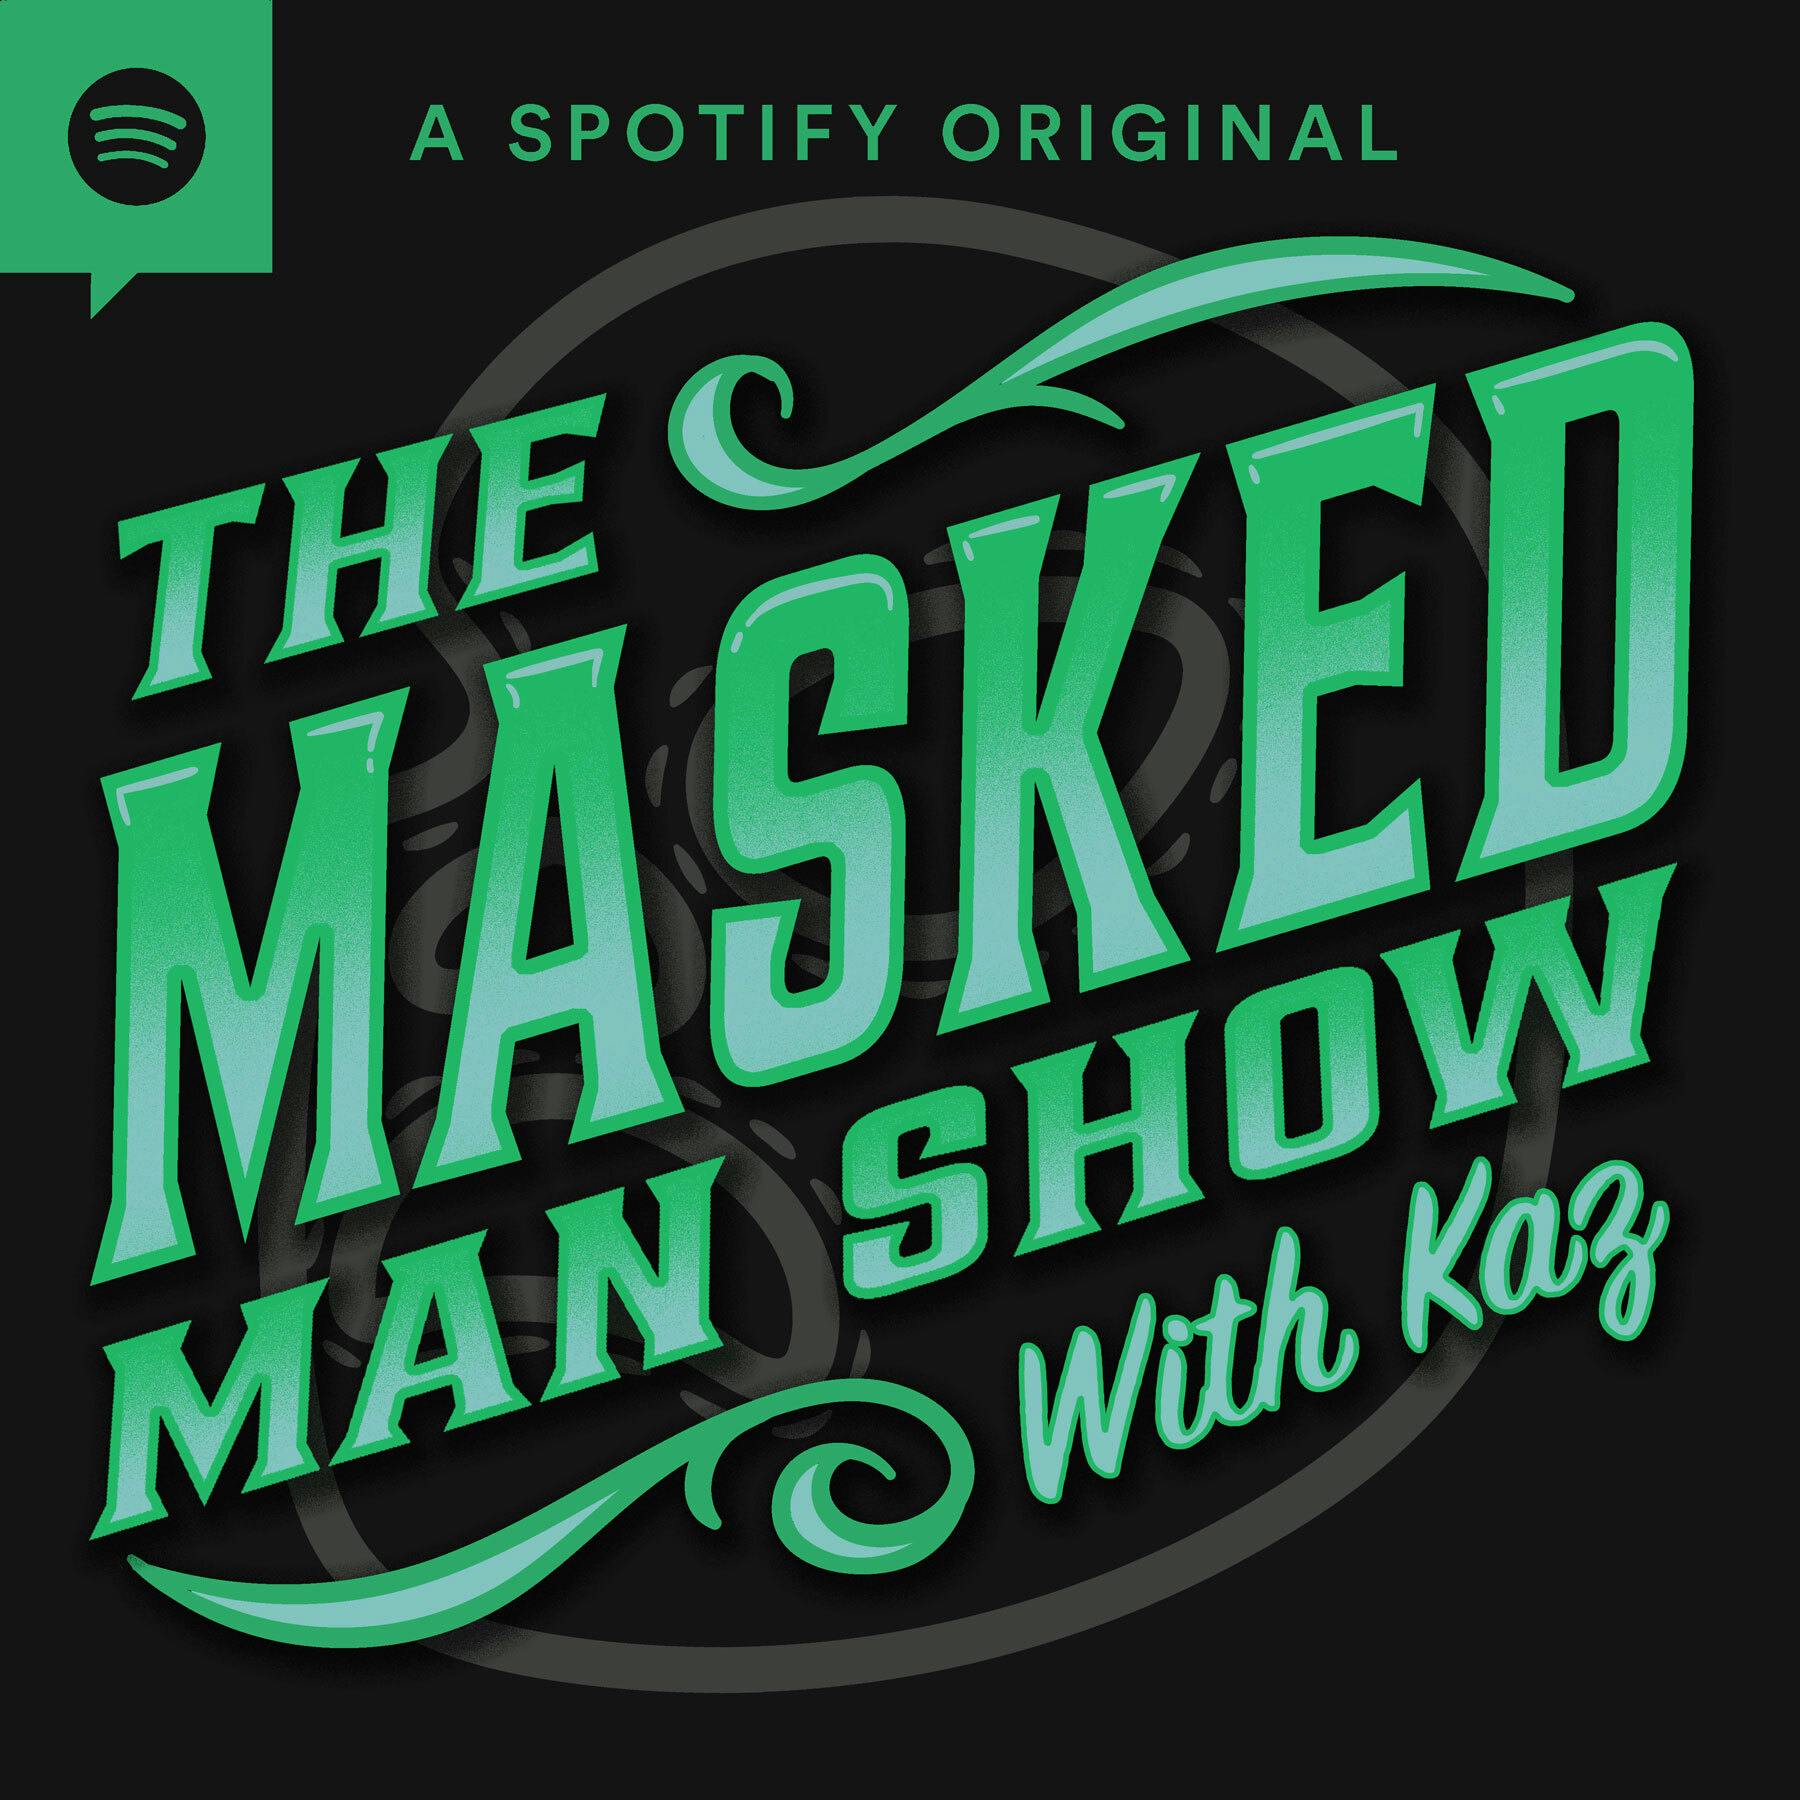 The Rock Reminds Cody He Is the Final Boss, Featuring Andrew Goldstein | The Masked Man Show